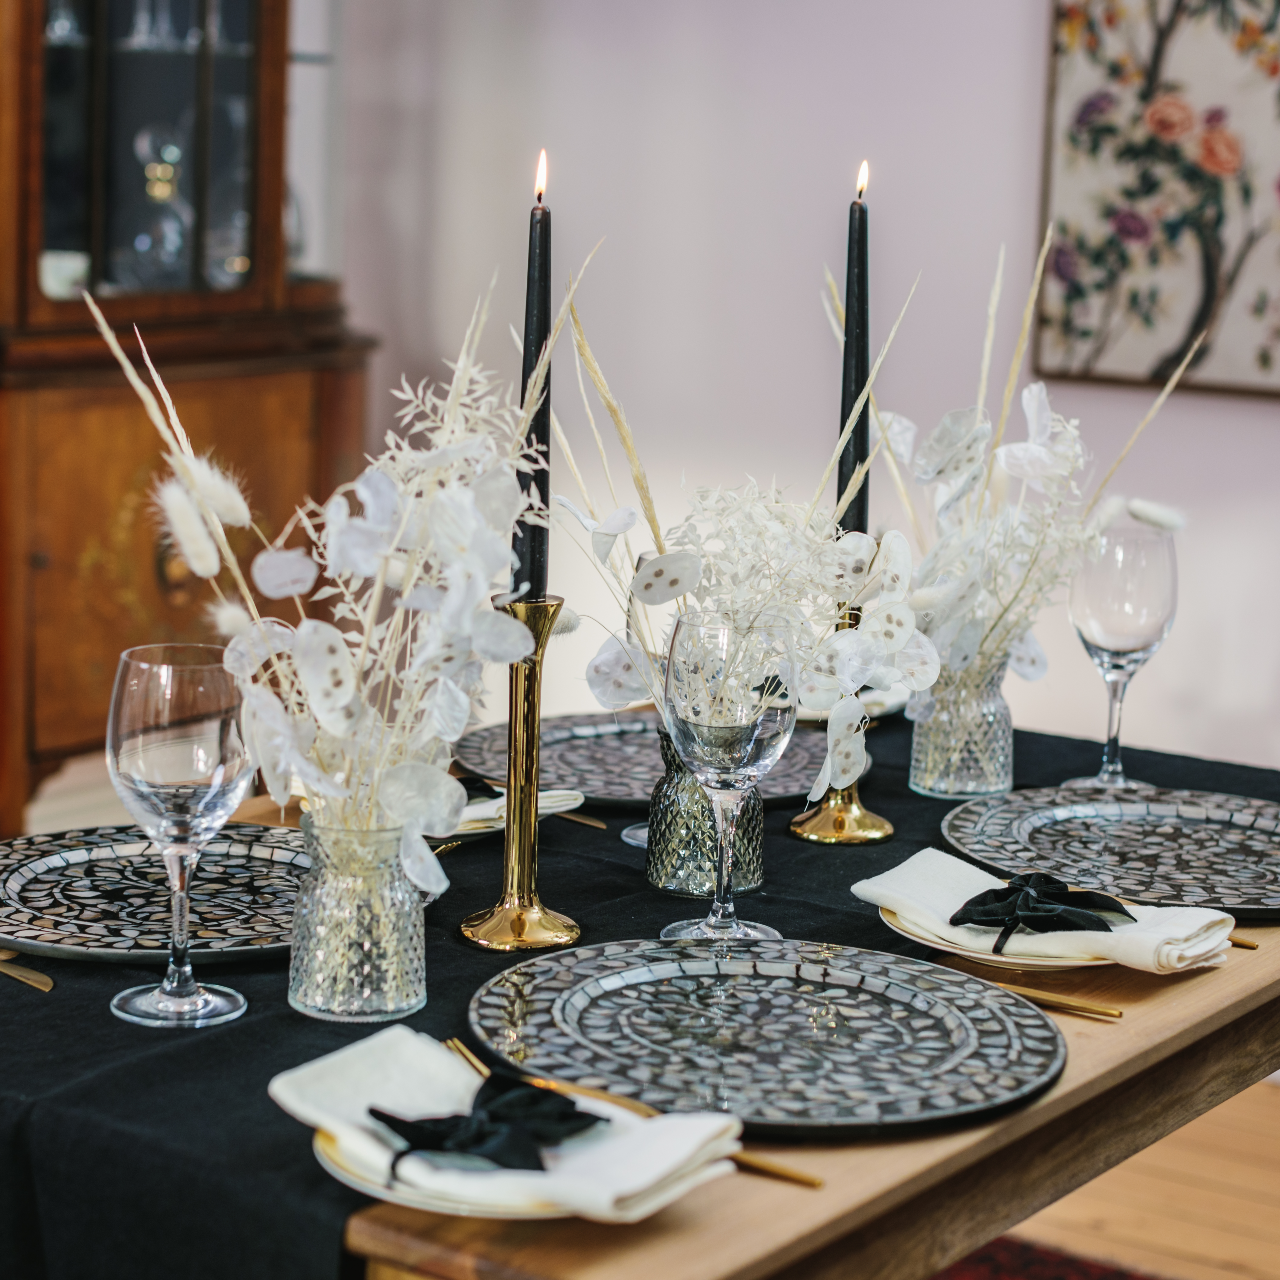 Side view of monochrome tablescape in a box table décor collection including black and white mother of pearl charger plates, sleek brass candlesticks, black tapered dinner candles, cut glass bud vases and dried flower displays with bunny tail and grasses